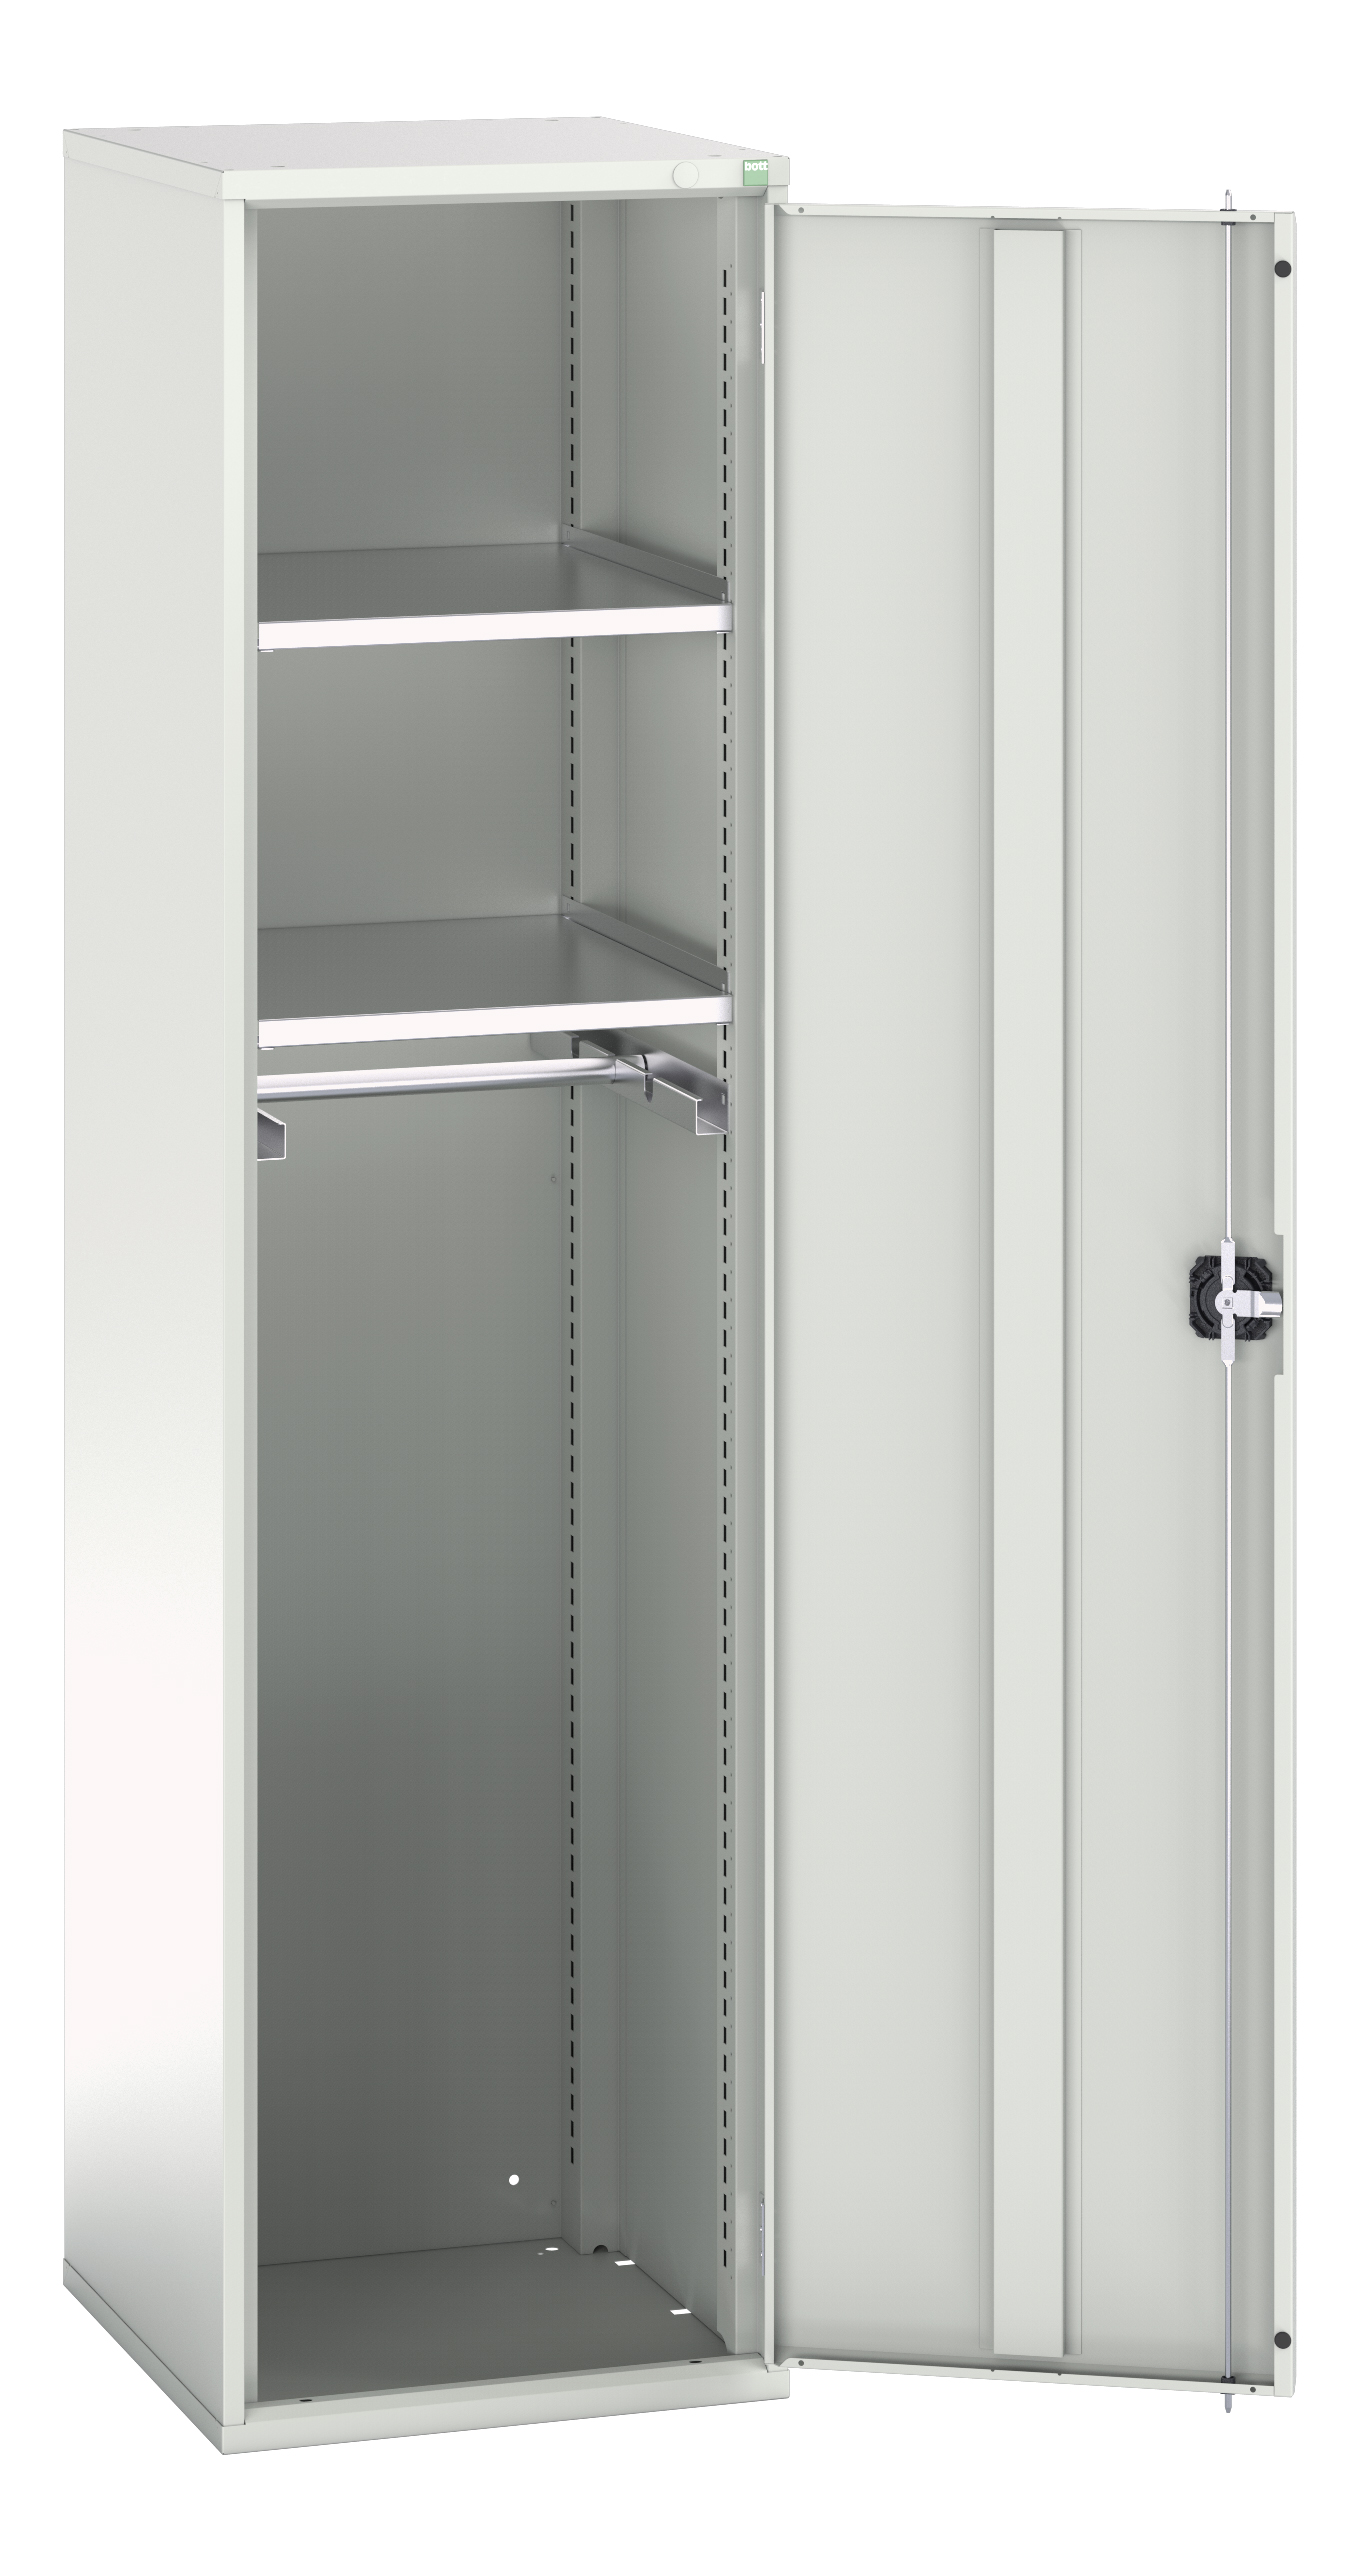 Bott Verso Ppe / Janitorial Kitted Cupboard - 16926351.16